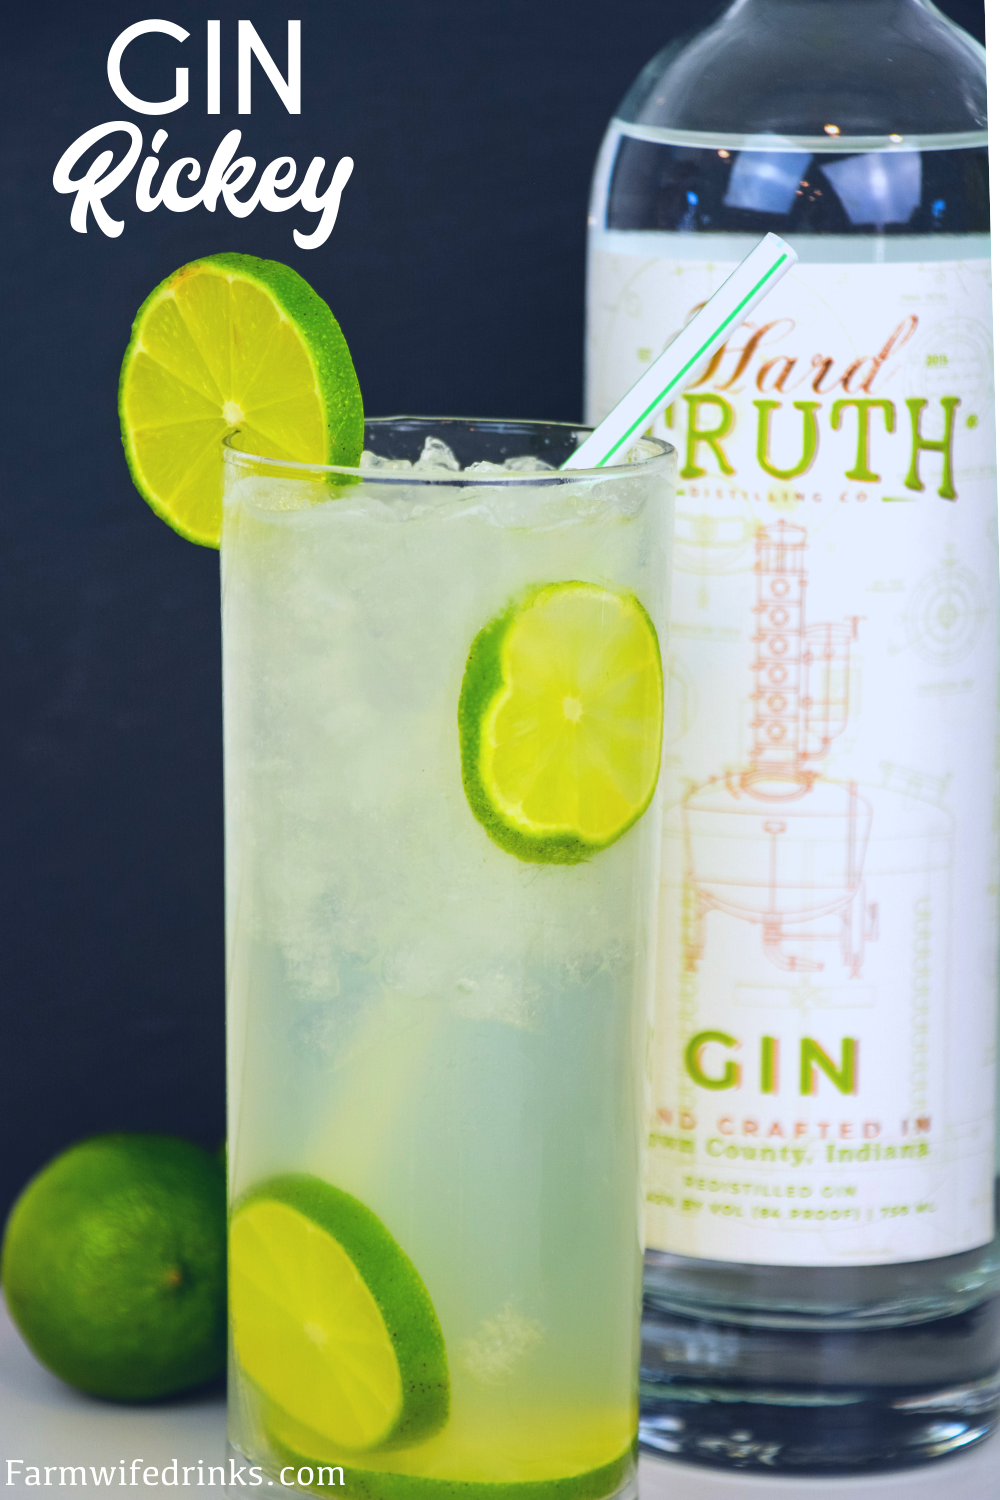 The gin rickey cocktail recipe is a highball cocktail made with fresh-squeezed lime juice, gin, and soda water.